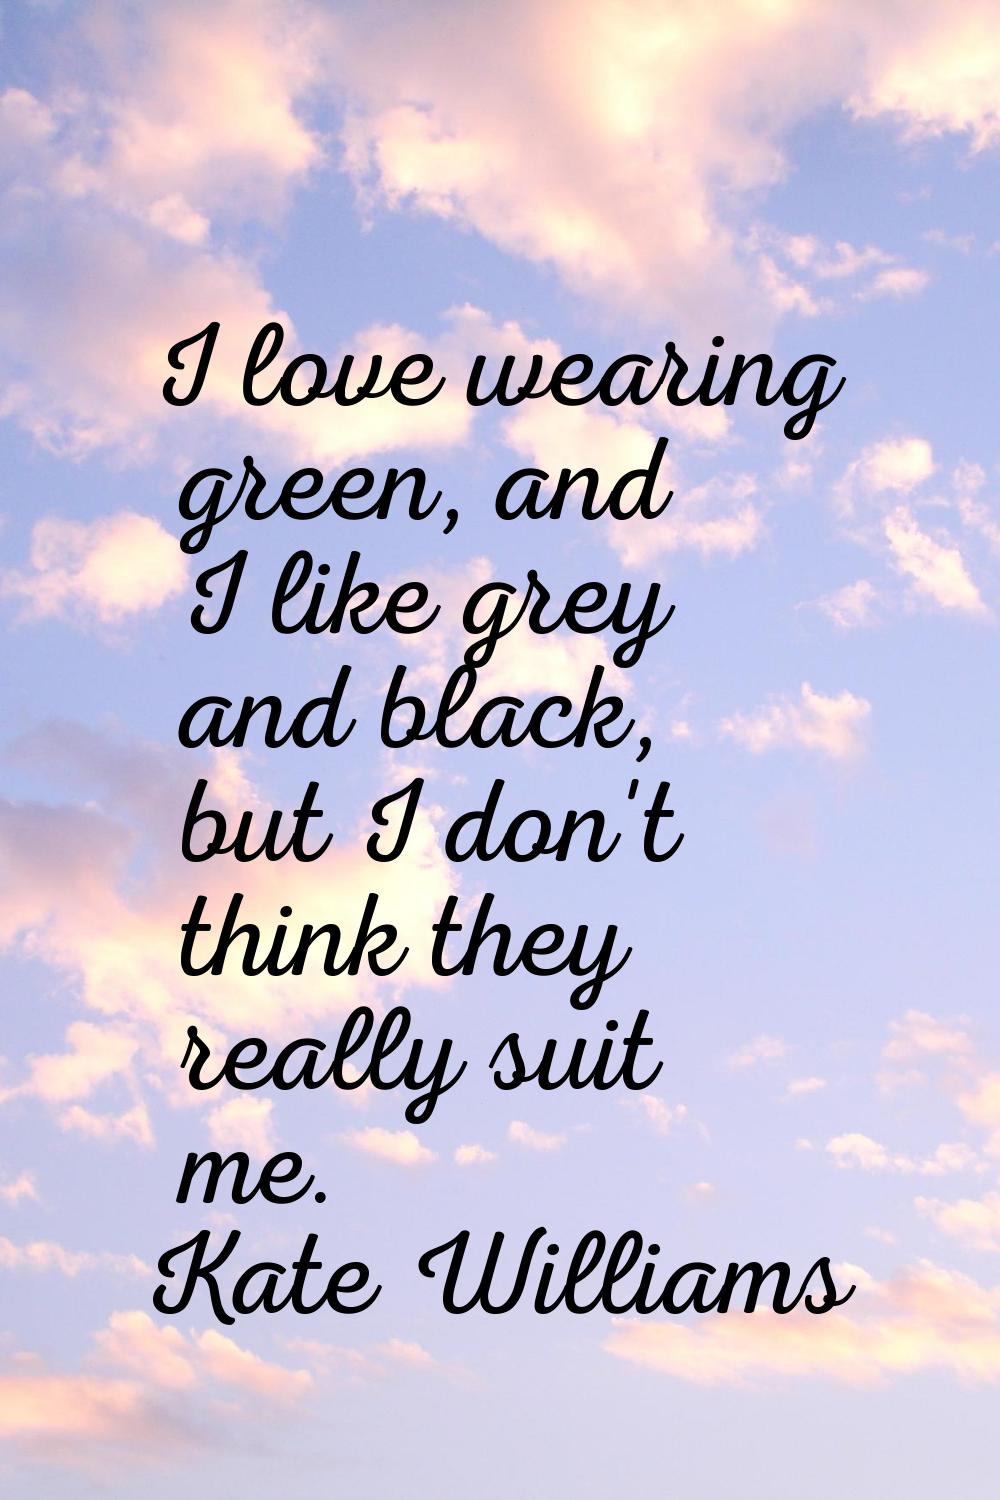 I love wearing green, and I like grey and black, but I don't think they really suit me.